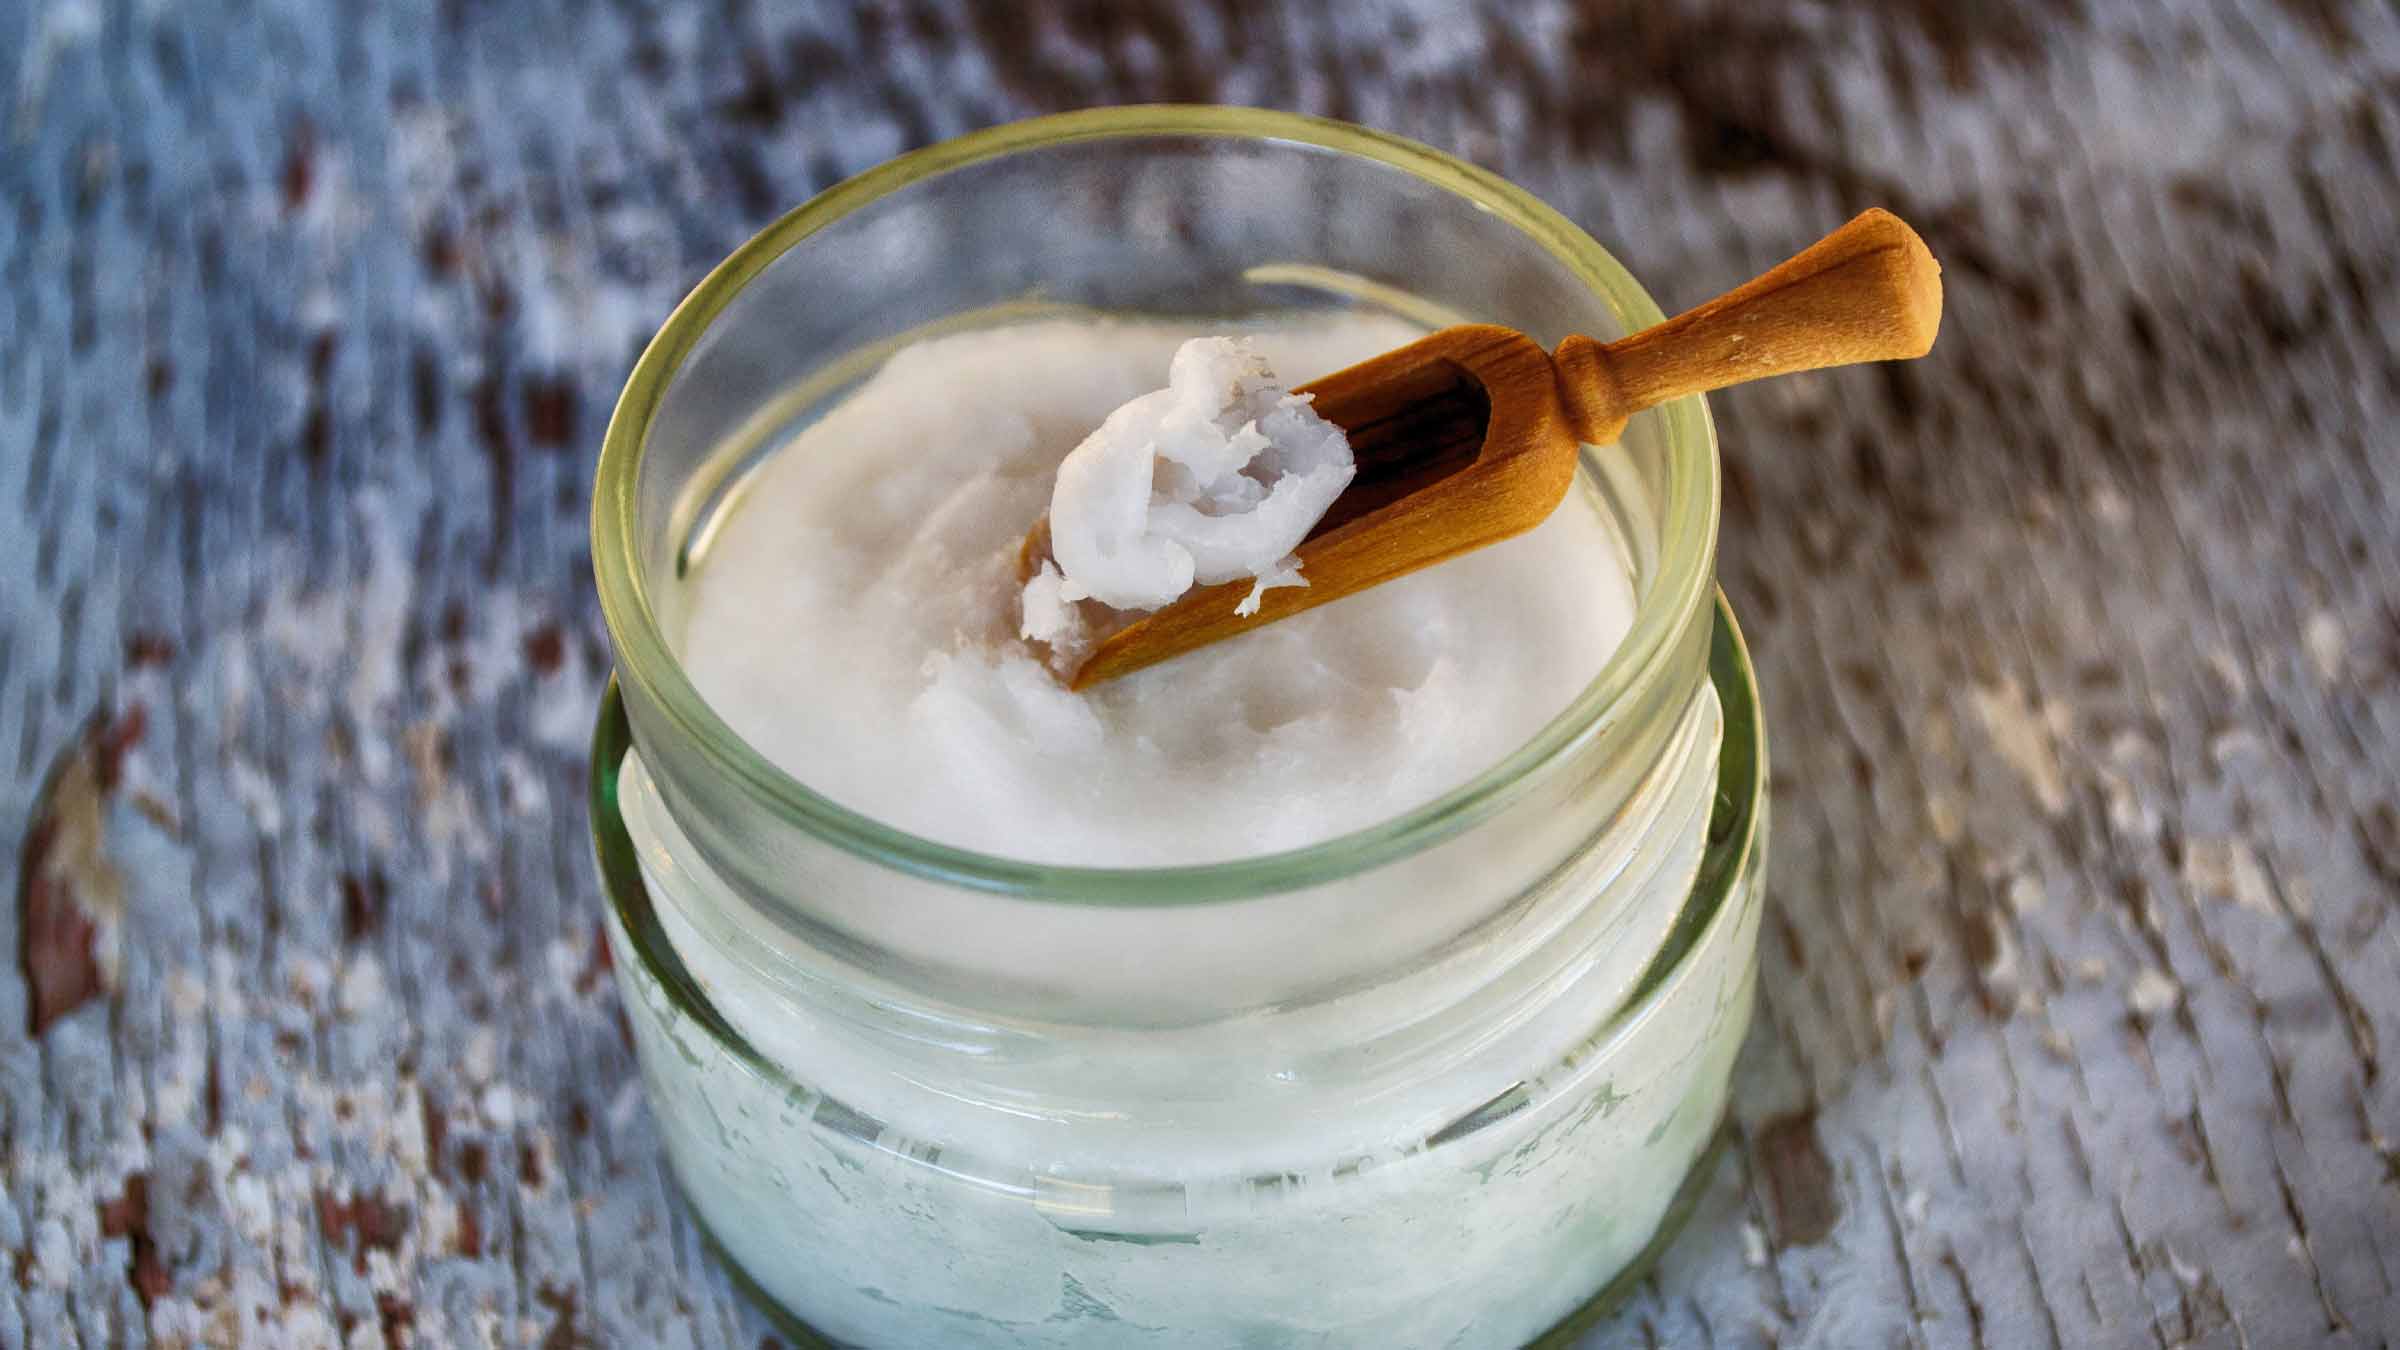 Jar of coconut oil with wooden spoon